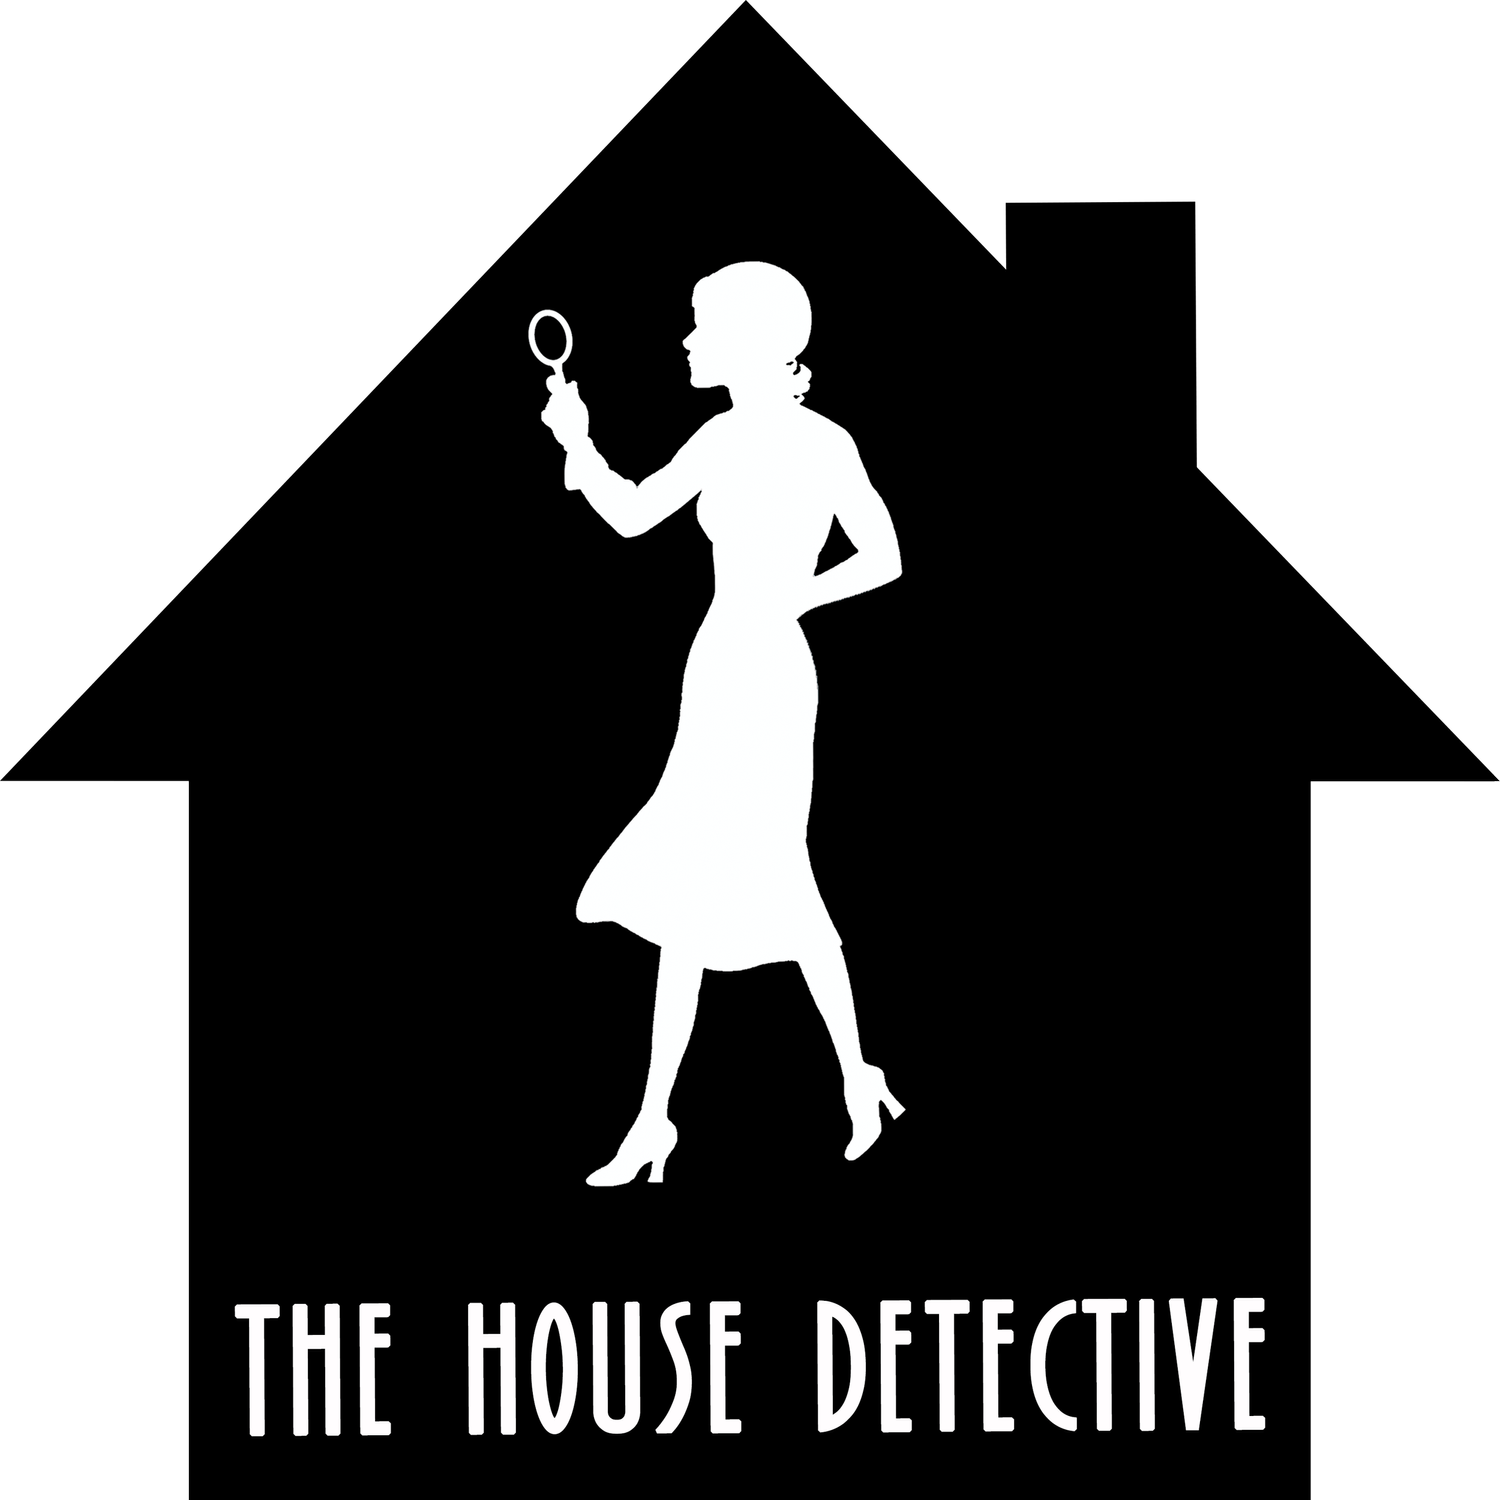 The House Detective